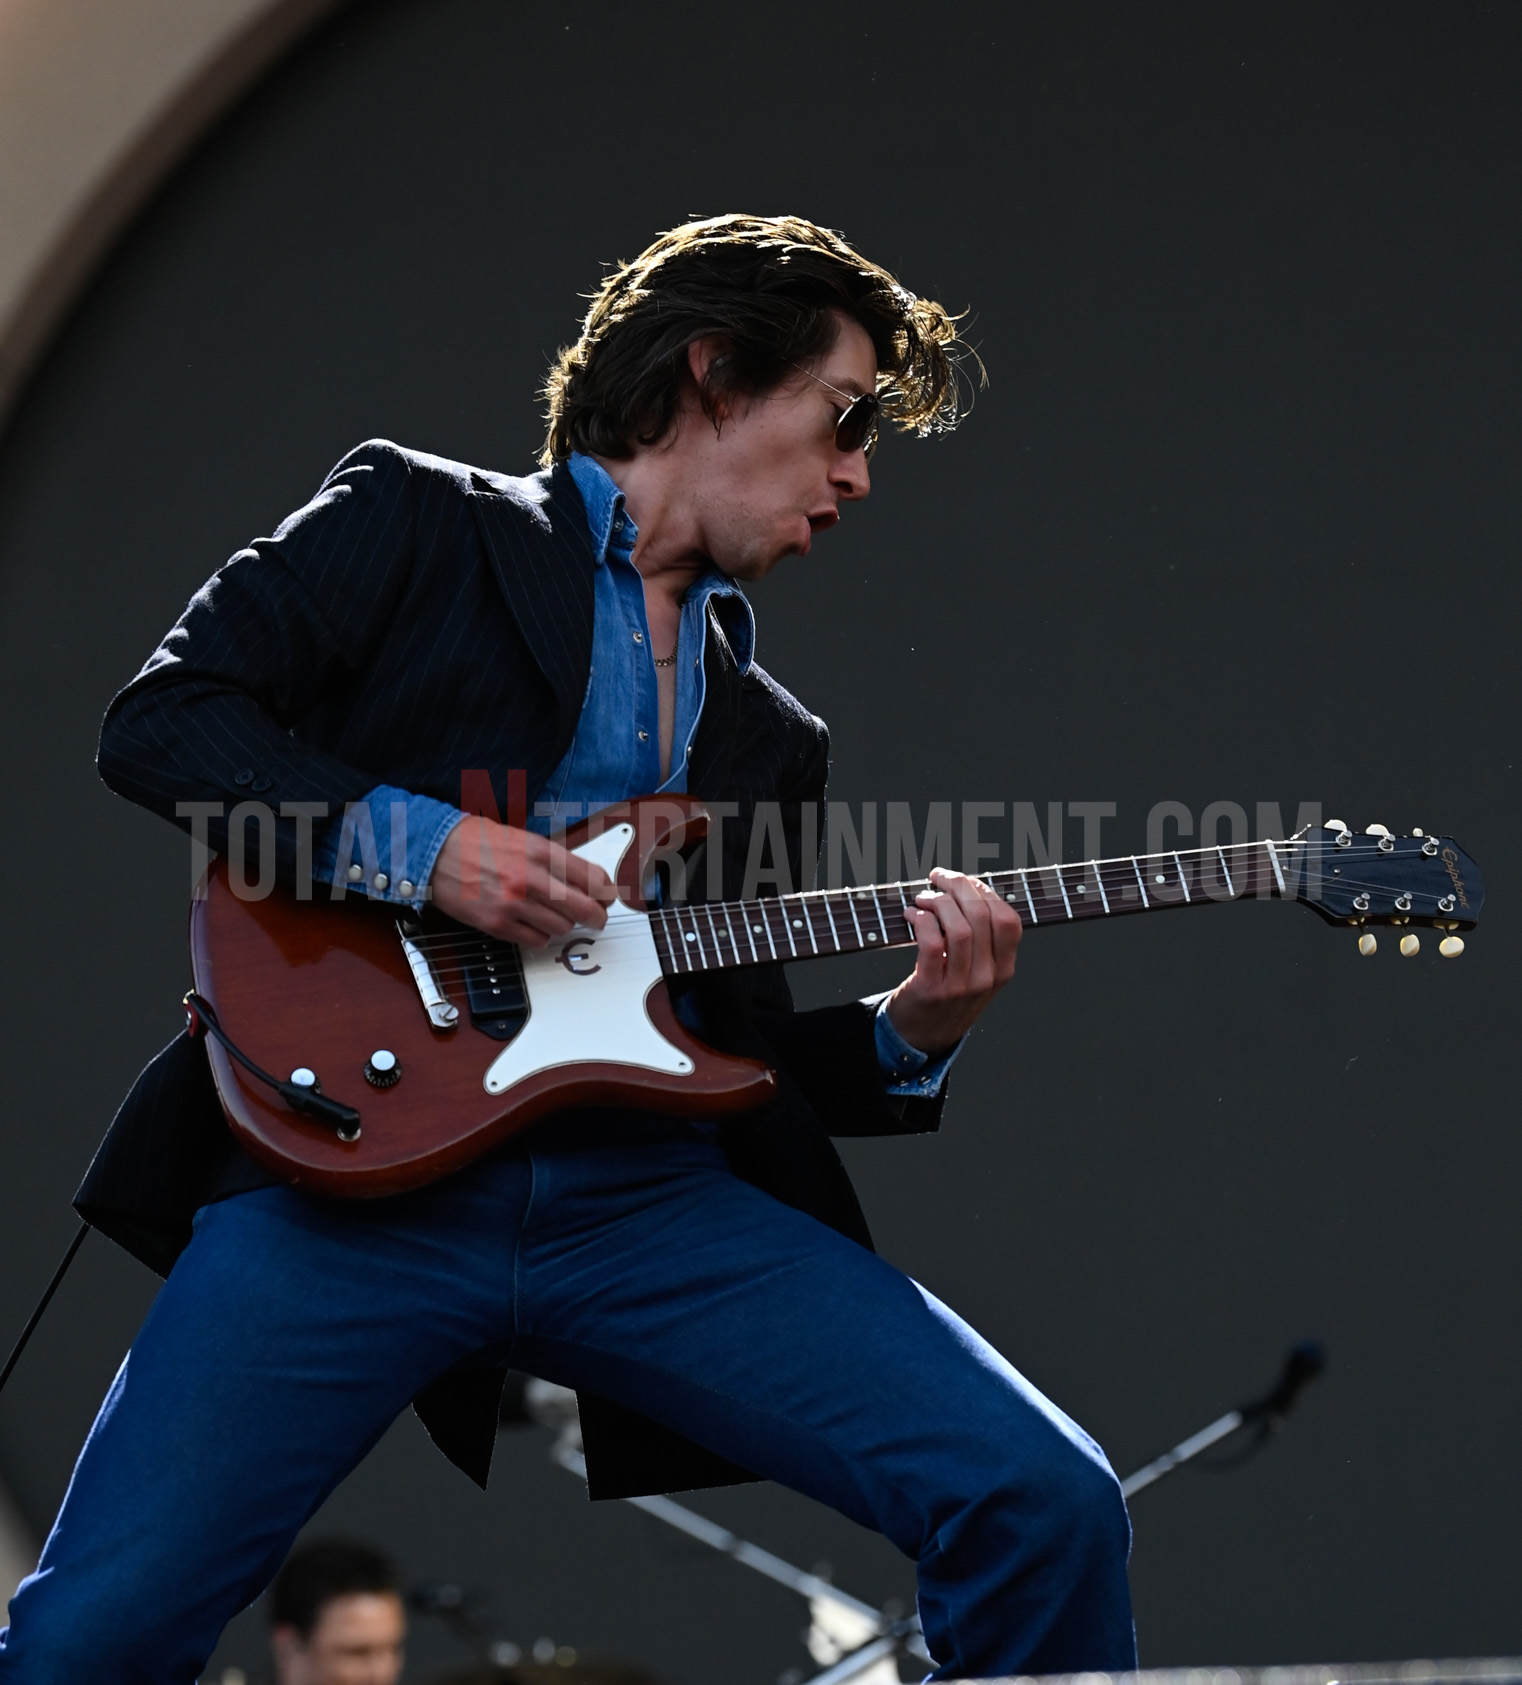 Live Event, Music, Stephen Farrell, Totalntertainment, Arctic Monkeys, Manchester, Music Photography